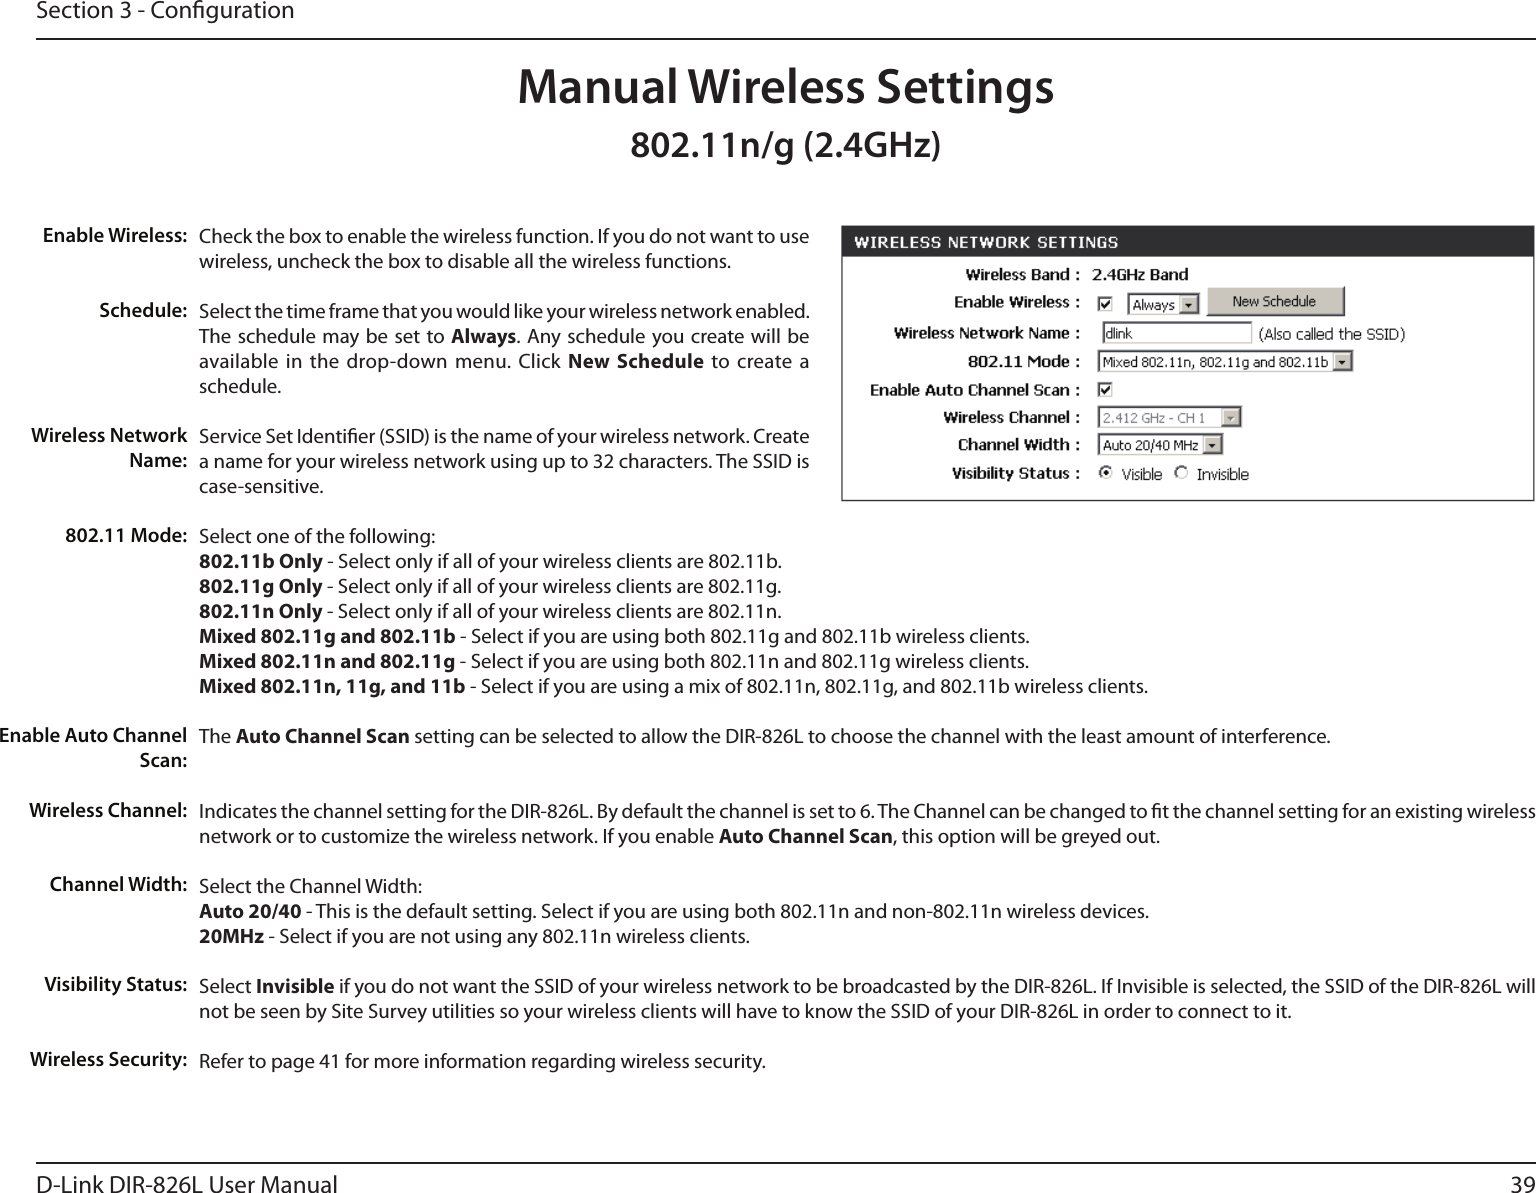 39D-Link DIR-826L User ManualSection 3 - CongurationCheck the box to enable the wireless function. If you do not want to use wireless, uncheck the box to disable all the wireless functions.Select the time frame that you would like your wireless network enabled. The schedule may be set to Always. Any schedule you create will be available in  the  drop-down menu. Click  New  Schedule  to create  a schedule.Service Set Identier (SSID) is the name of your wireless network. Create a name for your wireless network using up to 32 characters. The SSID is case-sensitive.Select one of the following:802.11b Only - Select only if all of your wireless clients are 802.11b.802.11g Only - Select only if all of your wireless clients are 802.11g.802.11n Only - Select only if all of your wireless clients are 802.11n.Mixed 802.11g and 802.11b - Select if you are using both 802.11g and 802.11b wireless clients.Mixed 802.11n and 802.11g - Select if you are using both 802.11n and 802.11g wireless clients.Mixed 802.11n, 11g, and 11b - Select if you are using a mix of 802.11n, 802.11g, and 802.11b wireless clients.The Auto Channel Scan setting can be selected to allow the DIR-826L to choose the channel with the least amount of interference.Indicates the channel setting for the DIR-826L. By default the channel is set to 6. The Channel can be changed to t the channel setting for an existing wireless network or to customize the wireless network. If you enable Auto Channel Scan, this option will be greyed out.Select the Channel Width:Auto 20/40 - This is the default setting. Select if you are using both 802.11n and non-802.11n wireless devices.20MHz - Select if you are not using any 802.11n wireless clients.Select Invisible if you do not want the SSID of your wireless network to be broadcasted by the DIR-826L. If Invisible is selected, the SSID of the DIR-826L will not be seen by Site Survey utilities so your wireless clients will have to know the SSID of your DIR-826L in order to connect to it.Refer to page 41 for more information regarding wireless security.Enable Wireless:Schedule:Wireless Network Name:802.11 Mode:Enable Auto Channel Scan:Wireless Channel:Manual Wireless SettingsChannel Width:Visibility Status:Wireless Security:802.11n/g (2.4GHz)